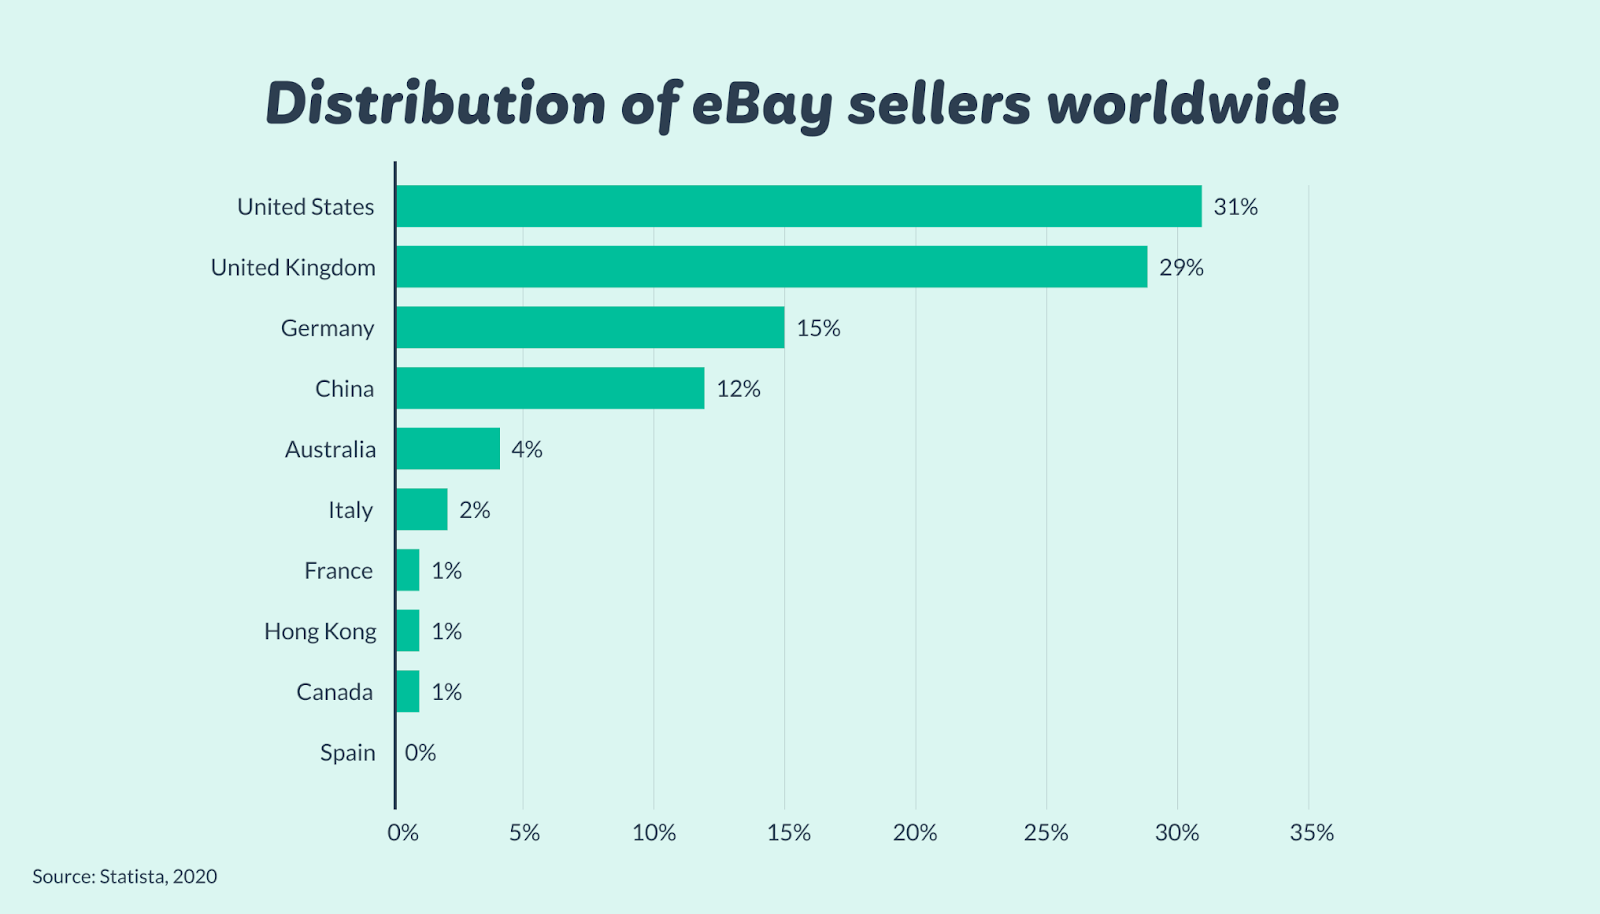 graph depicting distribution of ebay sellers worldwide in 2020